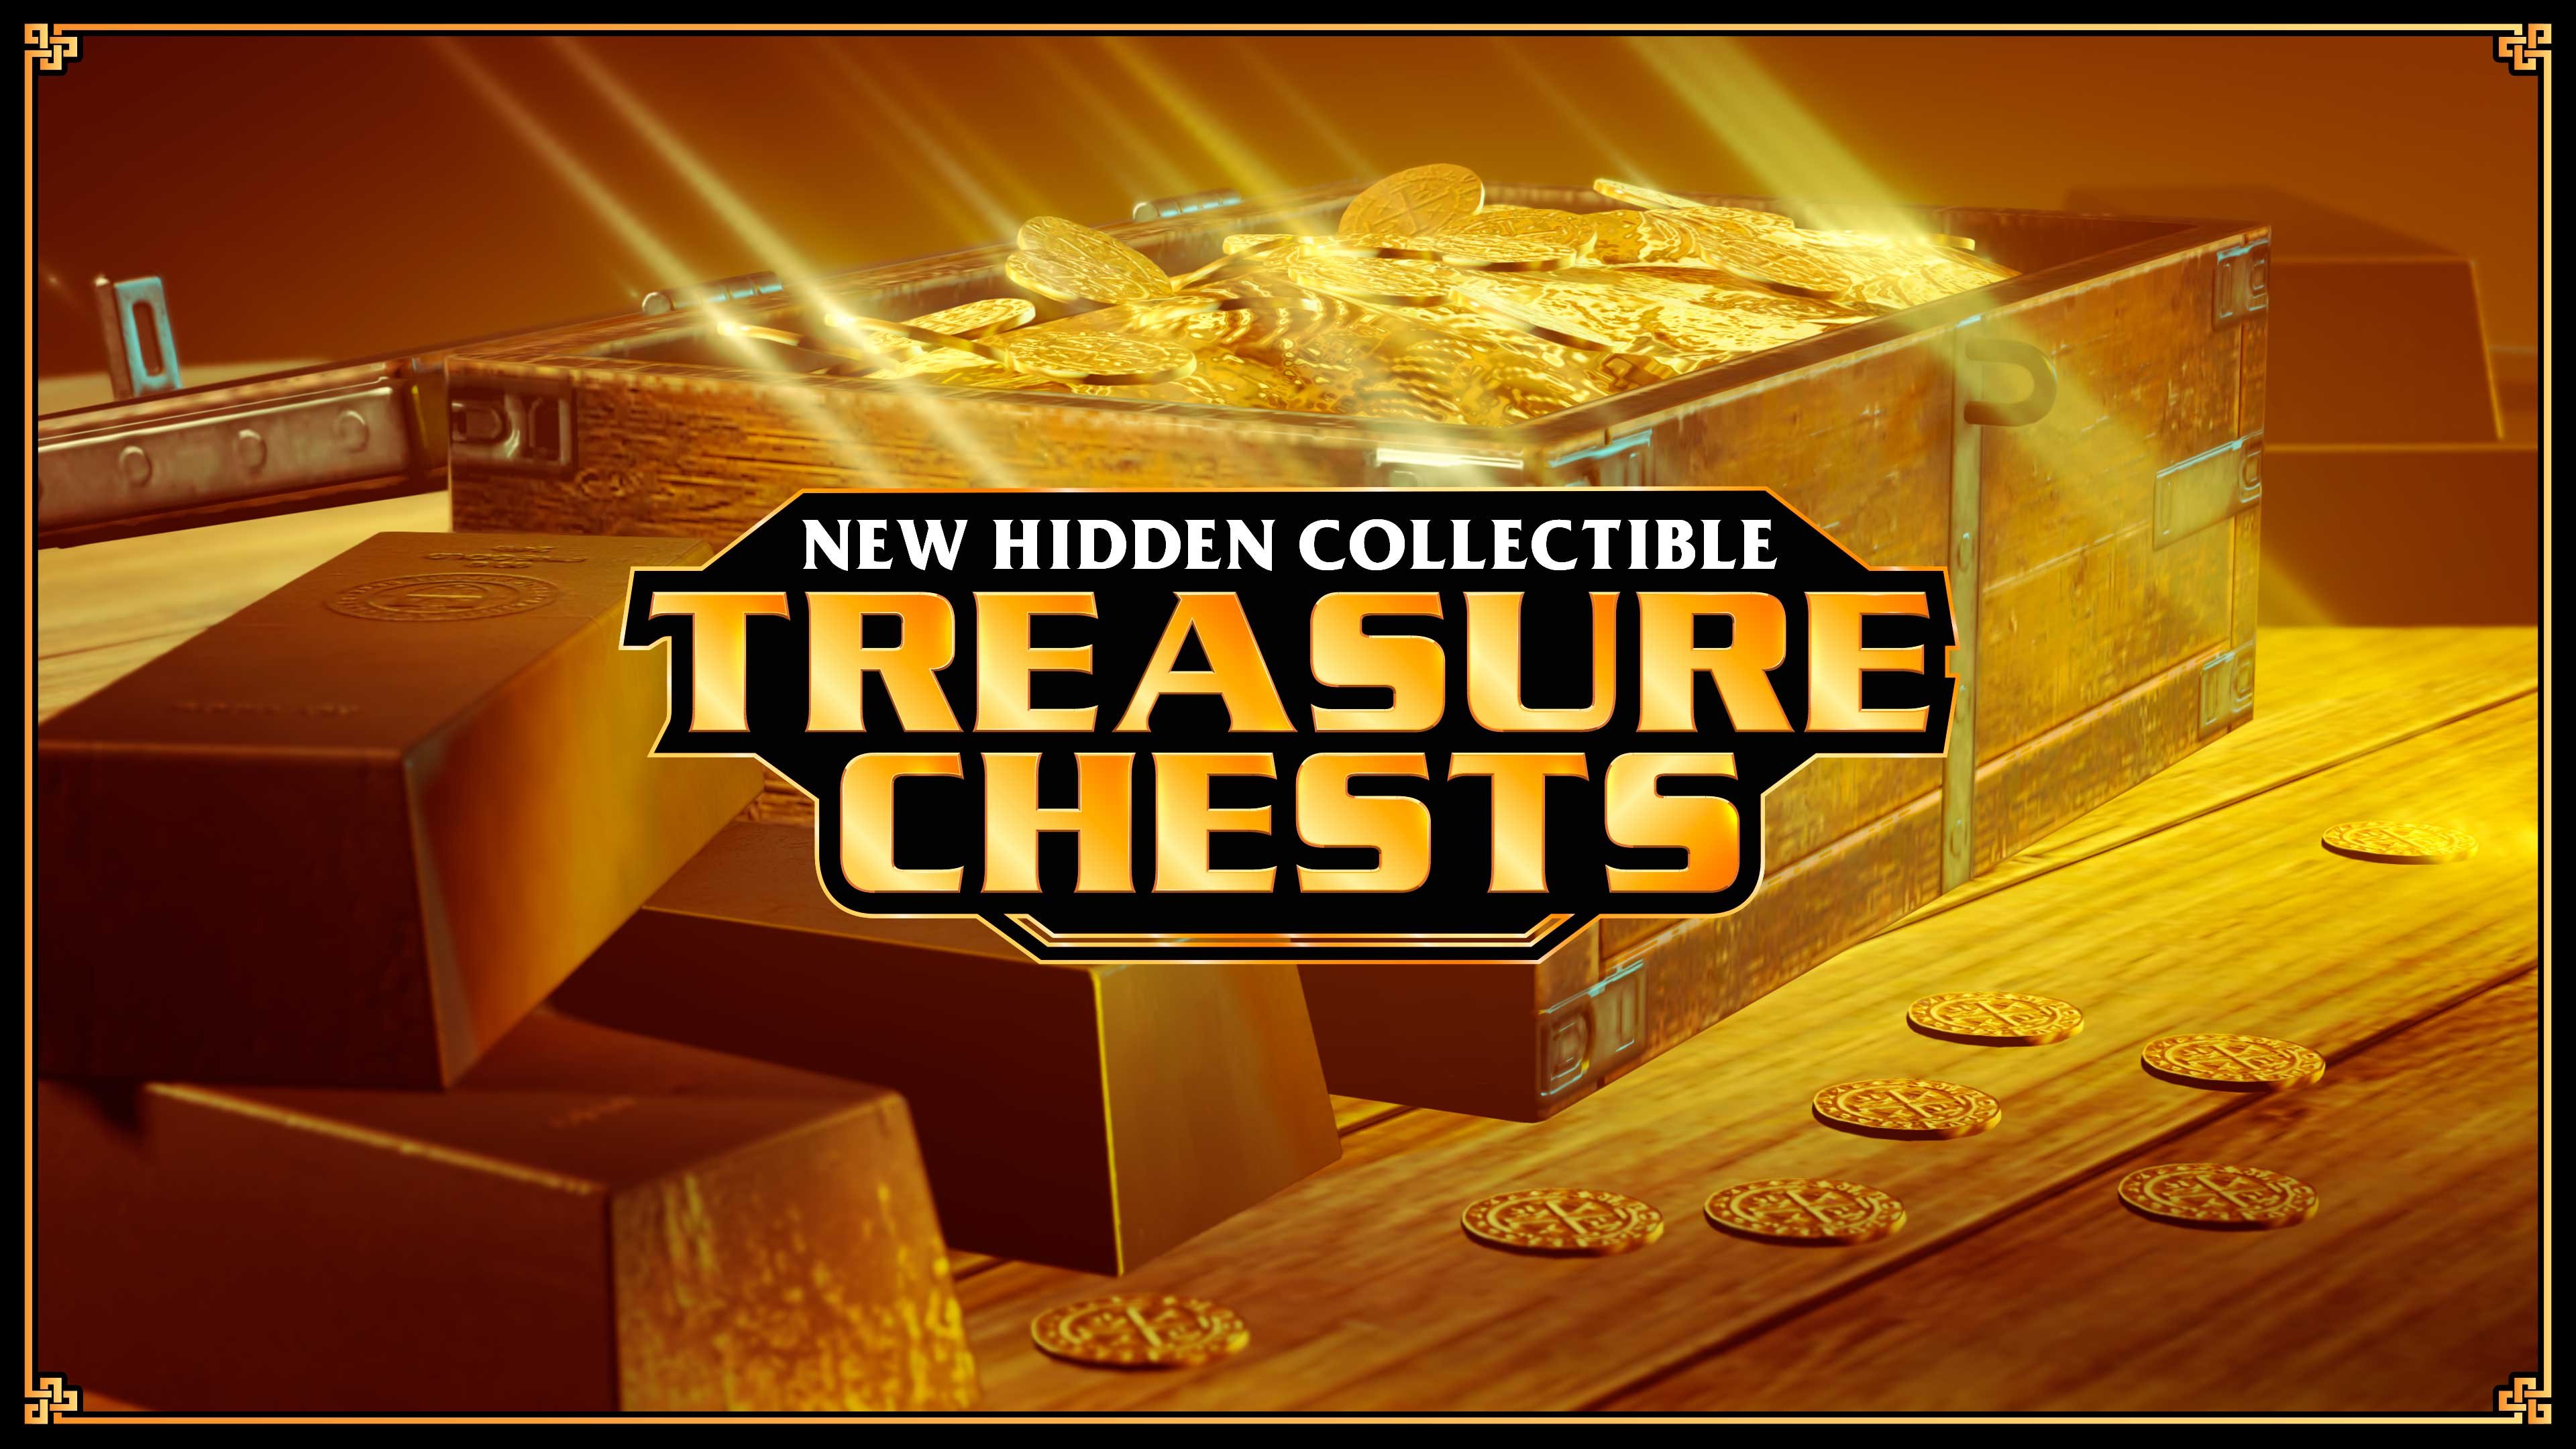 More information about "Nieuw: Treasure Chests in GTA Online"